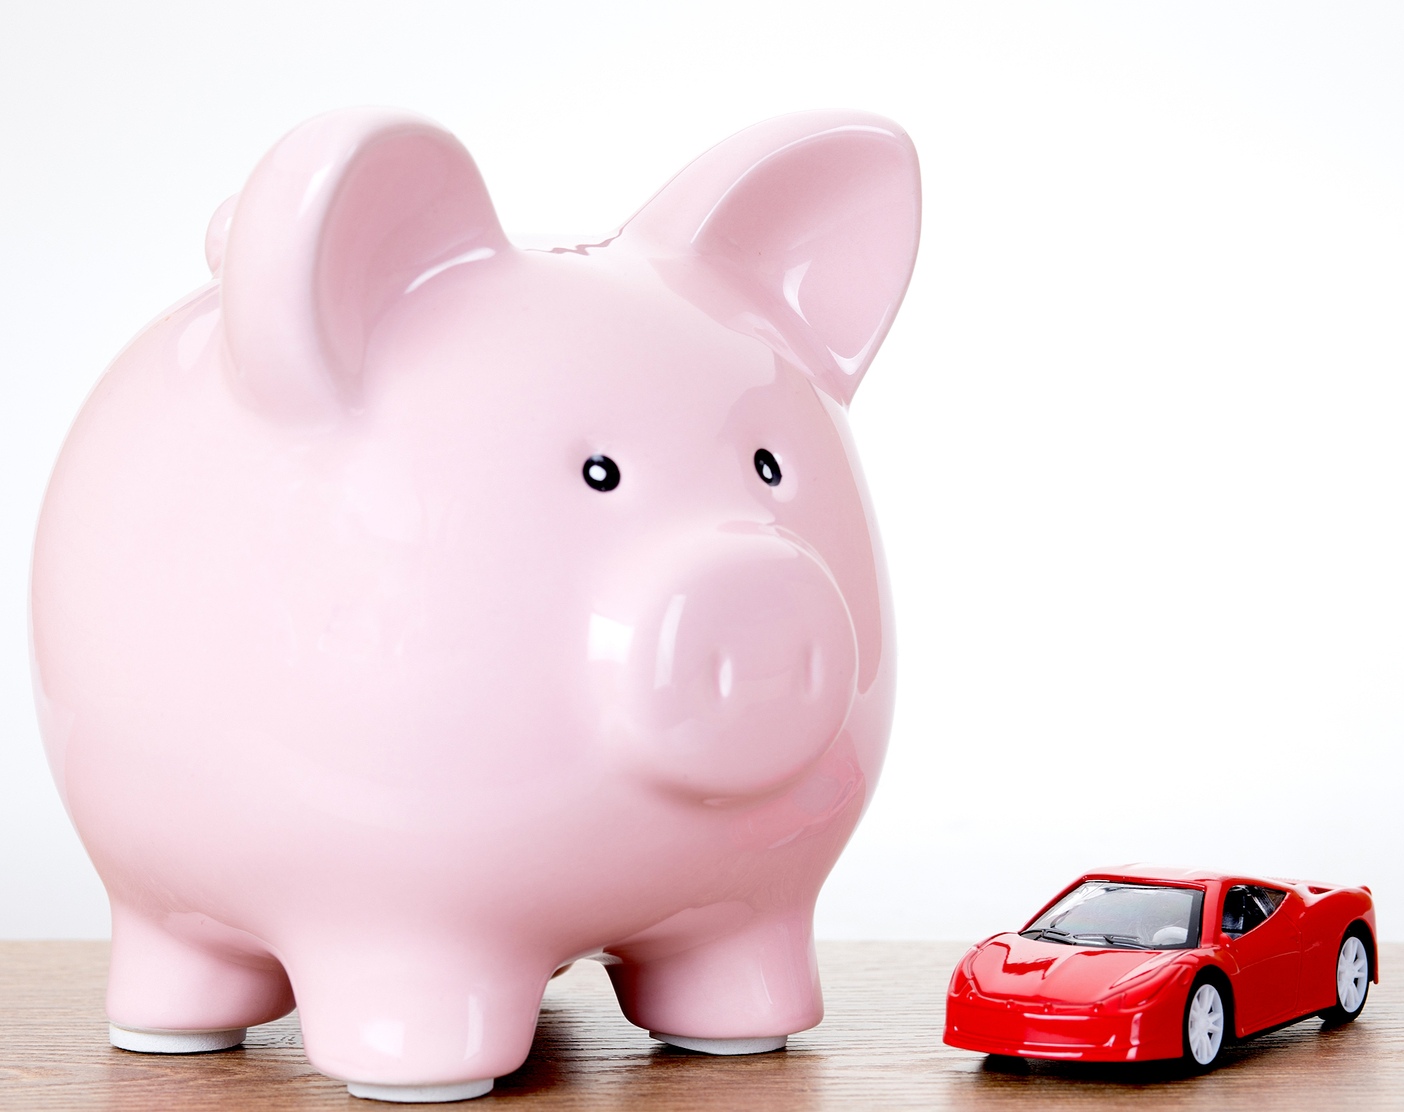 AAA: Annual Cost To Own A Vehicle Over $10,700